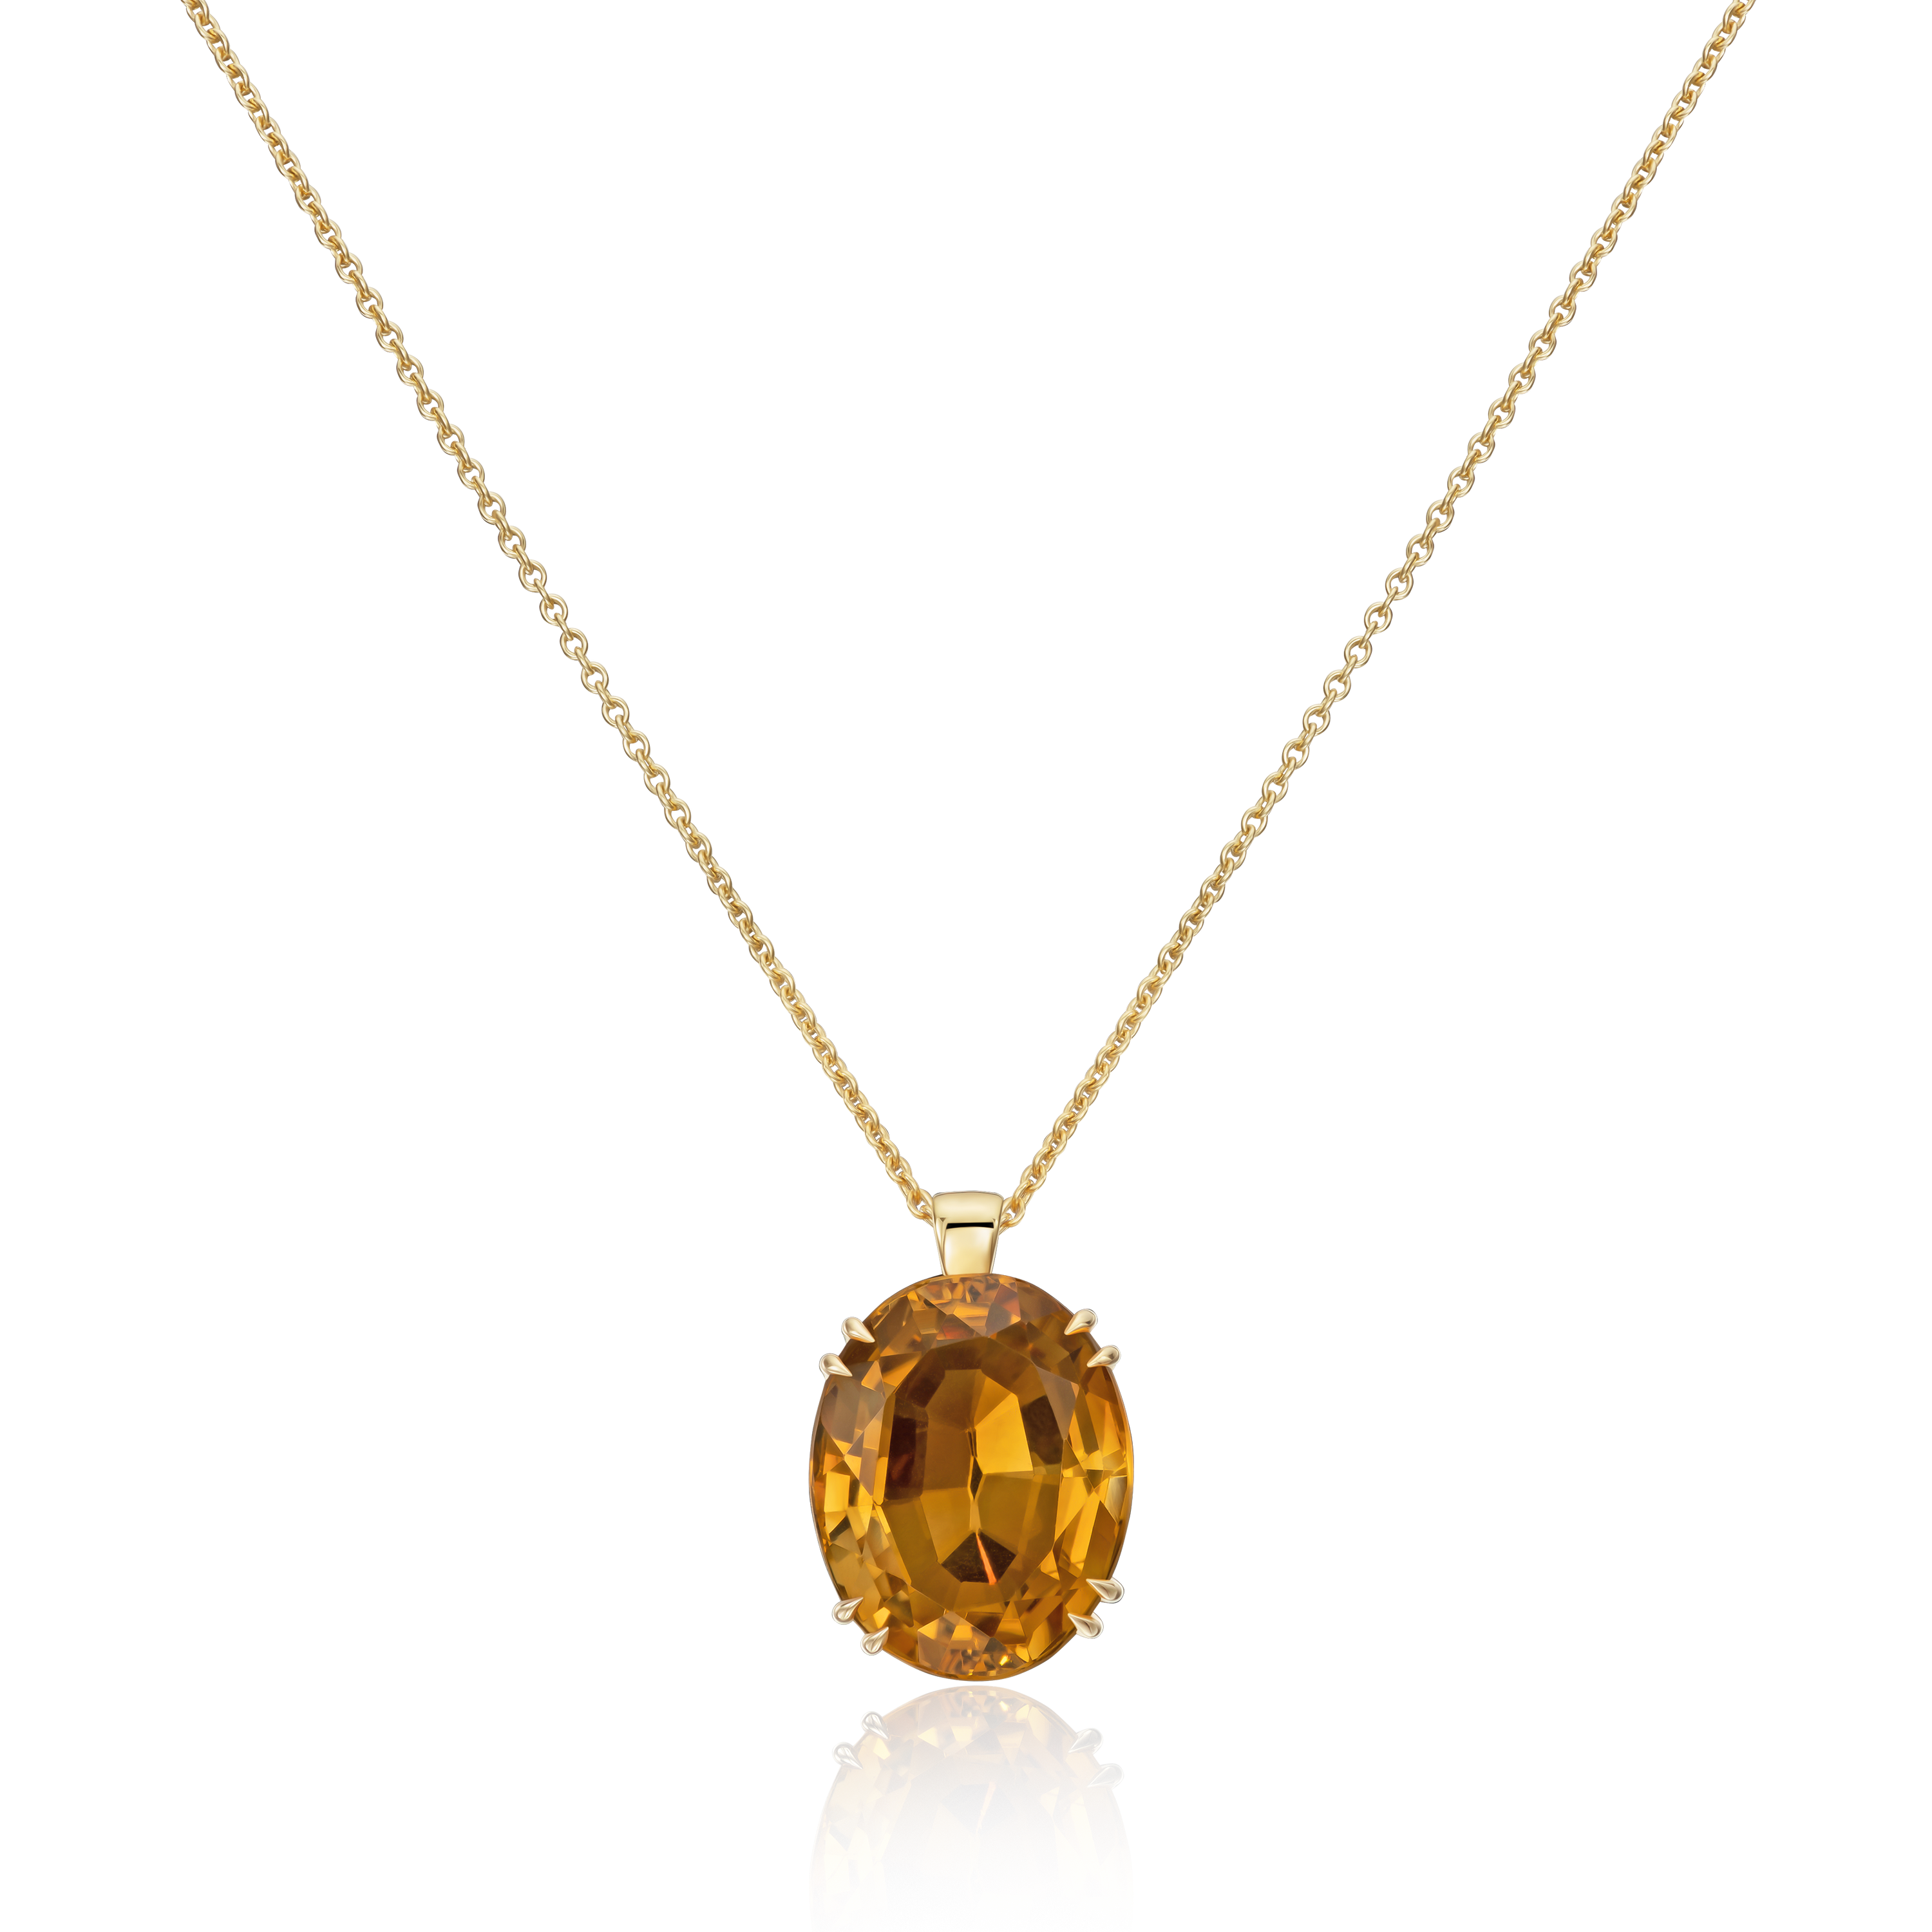 13.91cts Oval Citrine 18ct Yellow Gold Pendant